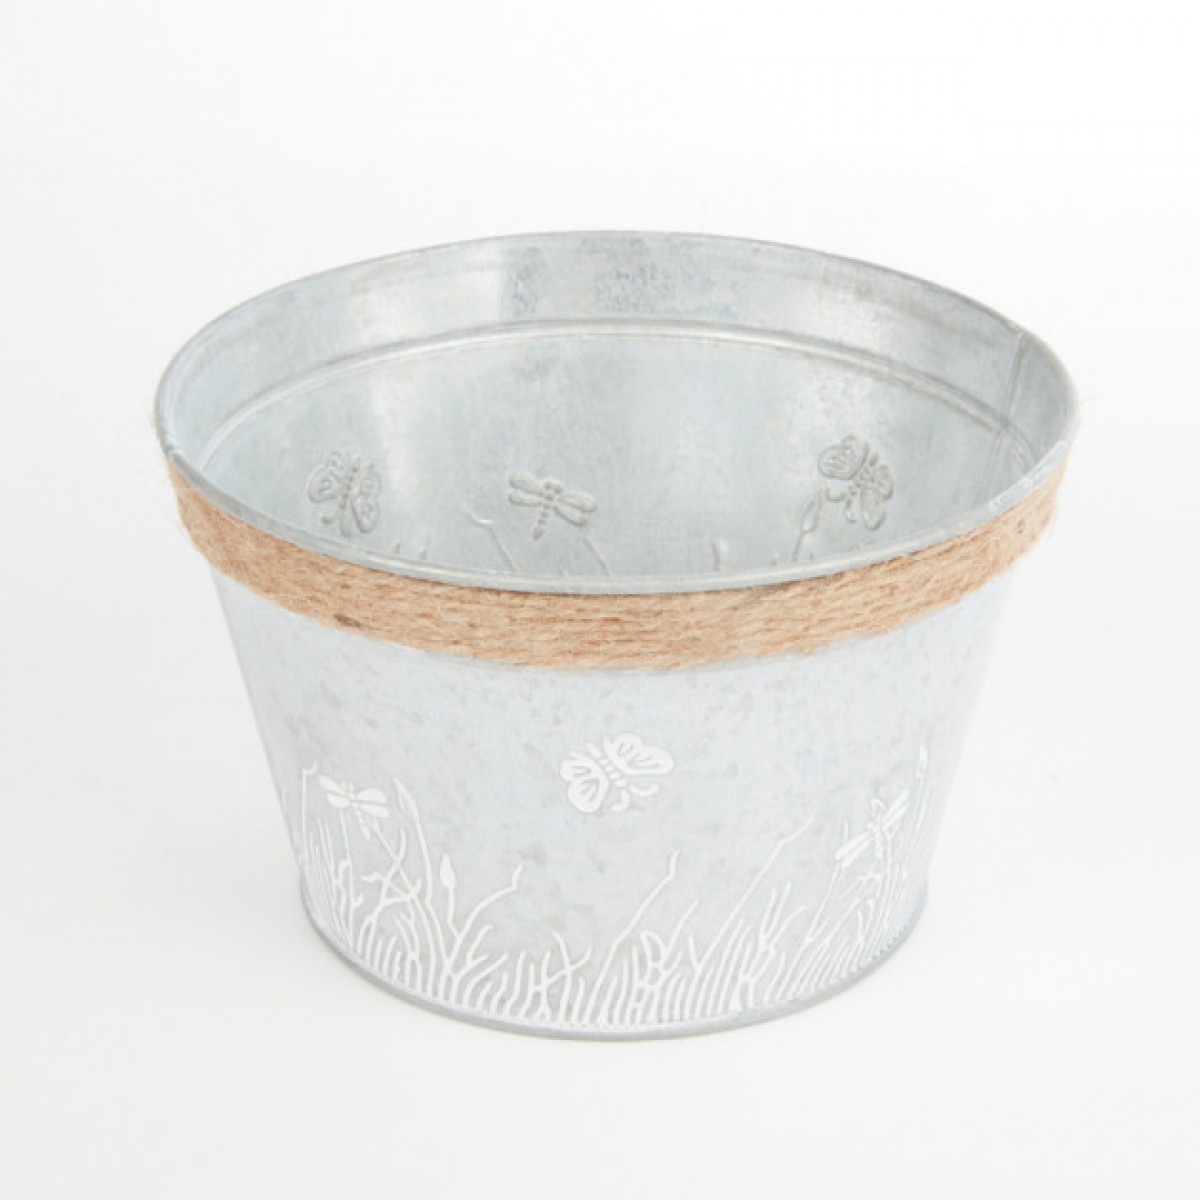 5205 Bowl (12 Pcs) Lined 18x11cm Tin/Metal Container